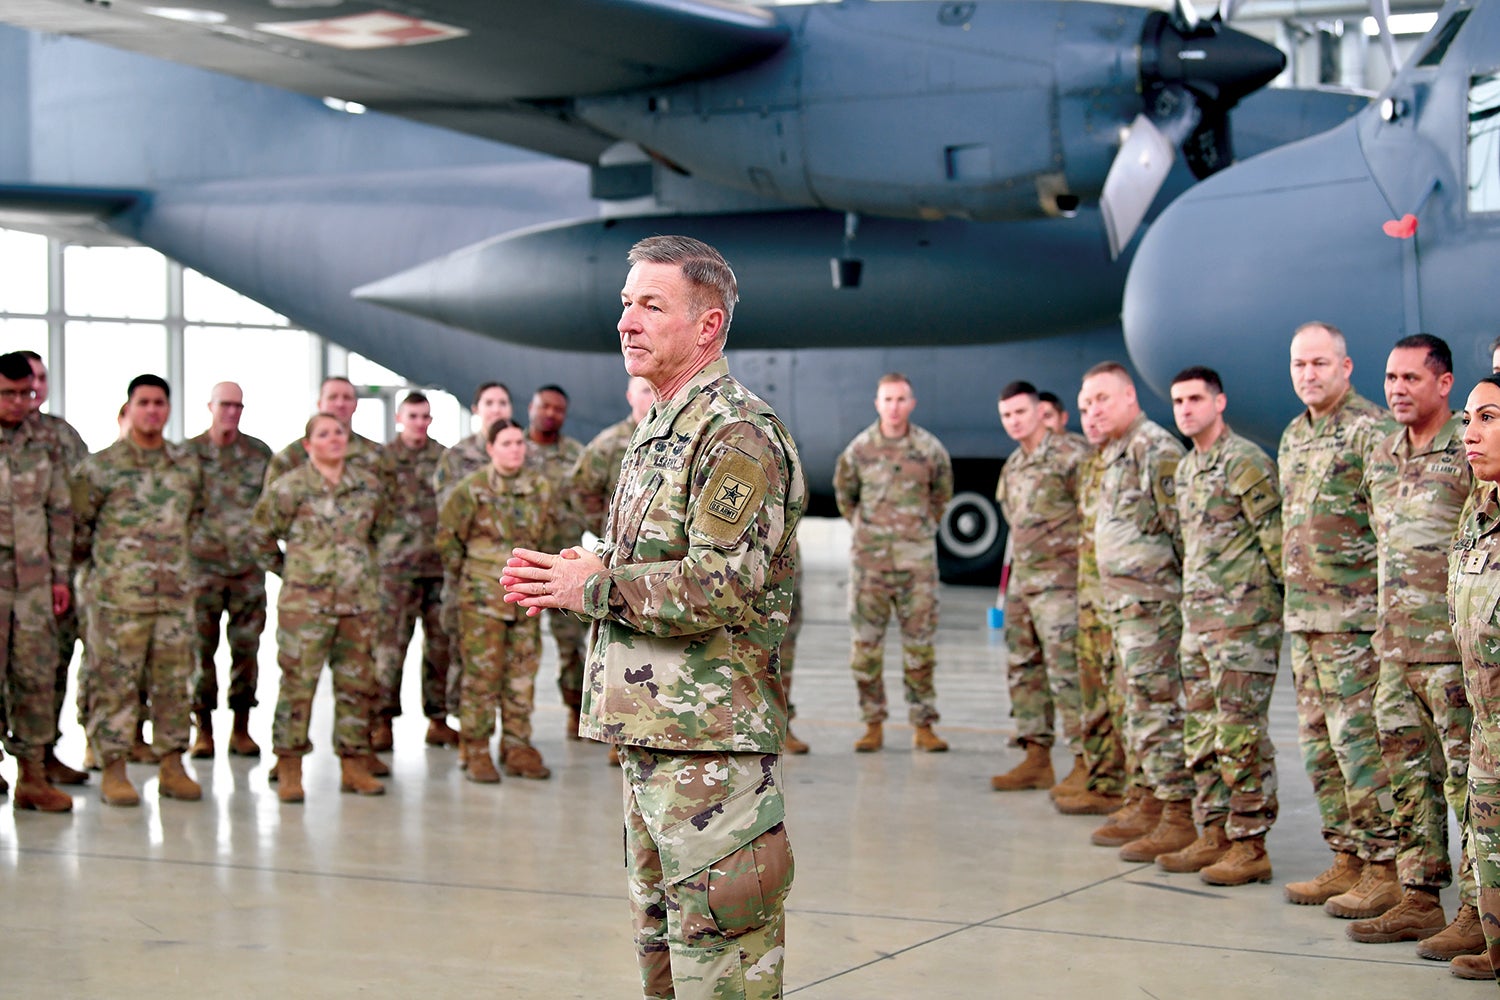 McConville talks to troops deployed to Poland in December. (Credit: U.S. Army/Master Sgt. Joseph Moore)